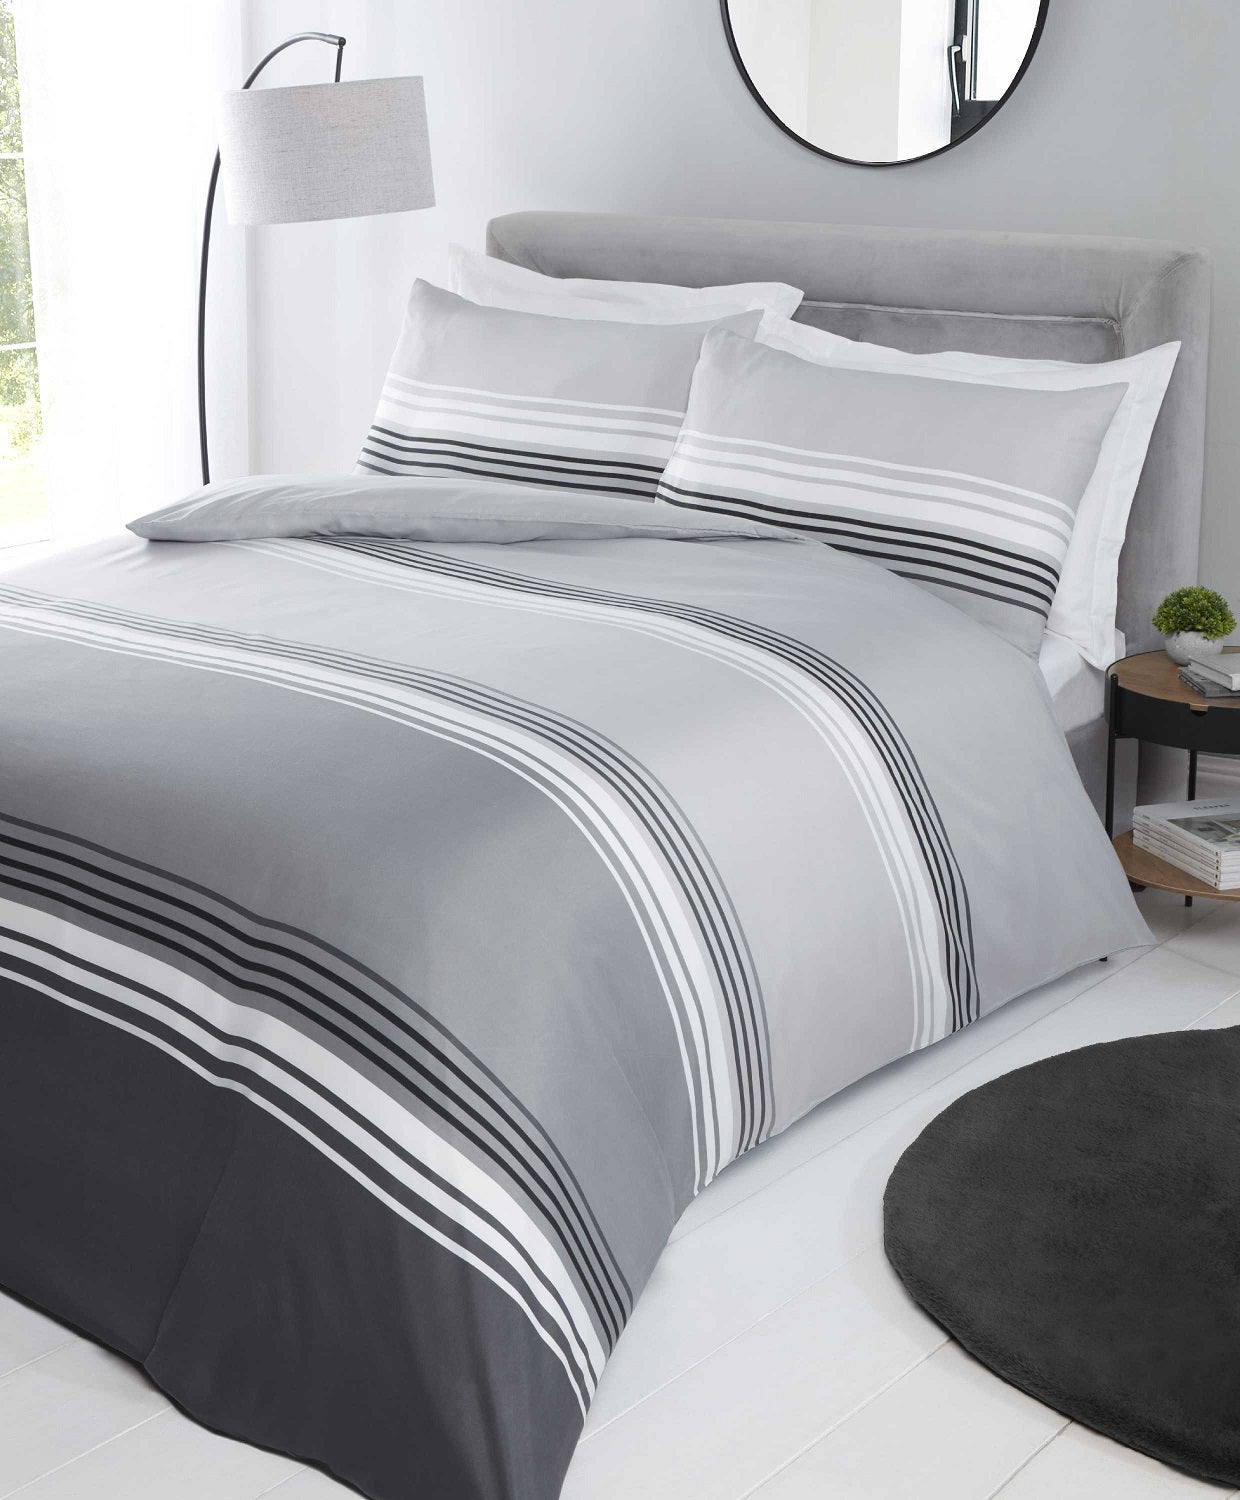 Teenagers Reversible Stiped Duvet Cover Set, Double, Grey & Black